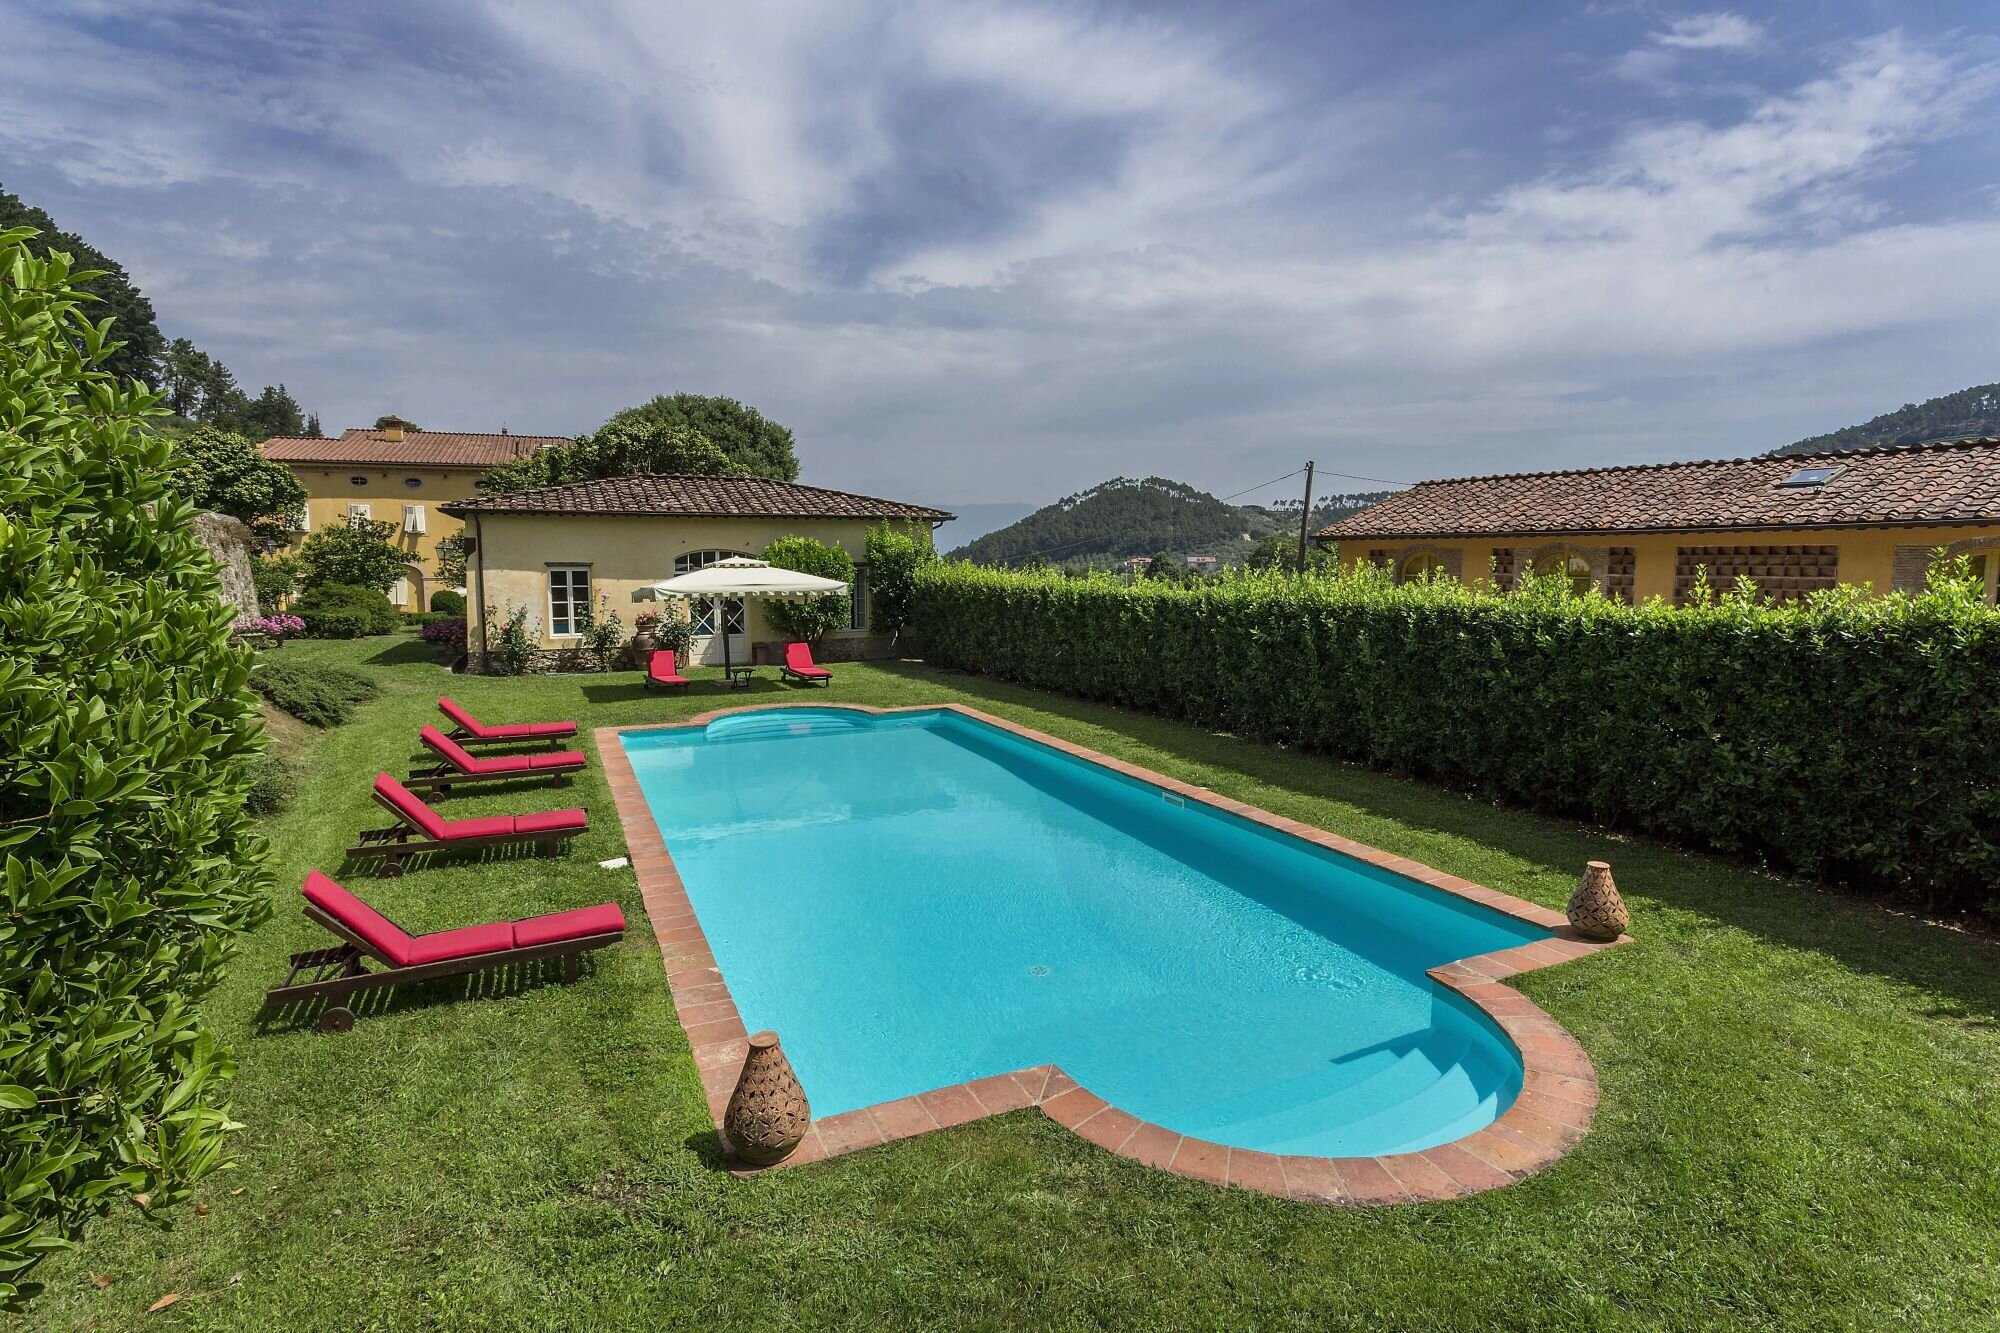 Francis York A Portfolio of Luxury Tuscan Villa Rentals is Coming to Auction38.jpeg